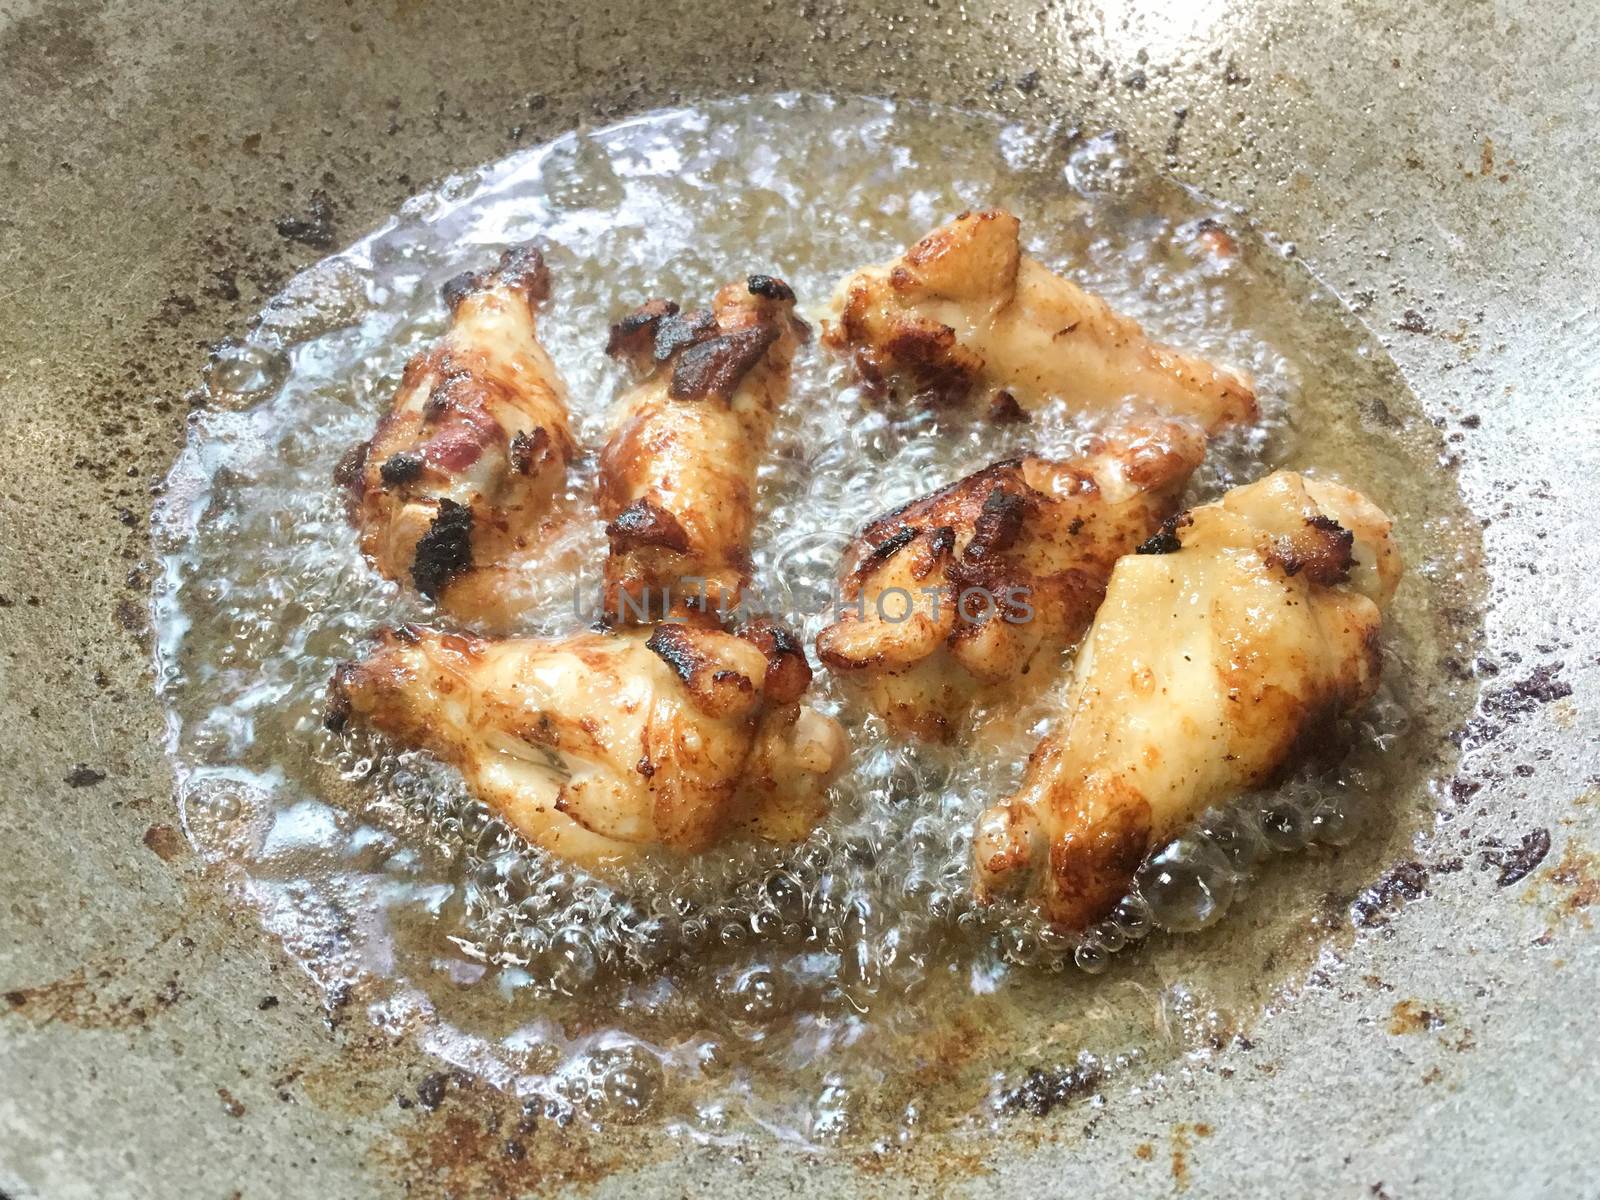 Legs of chickens in hot oil